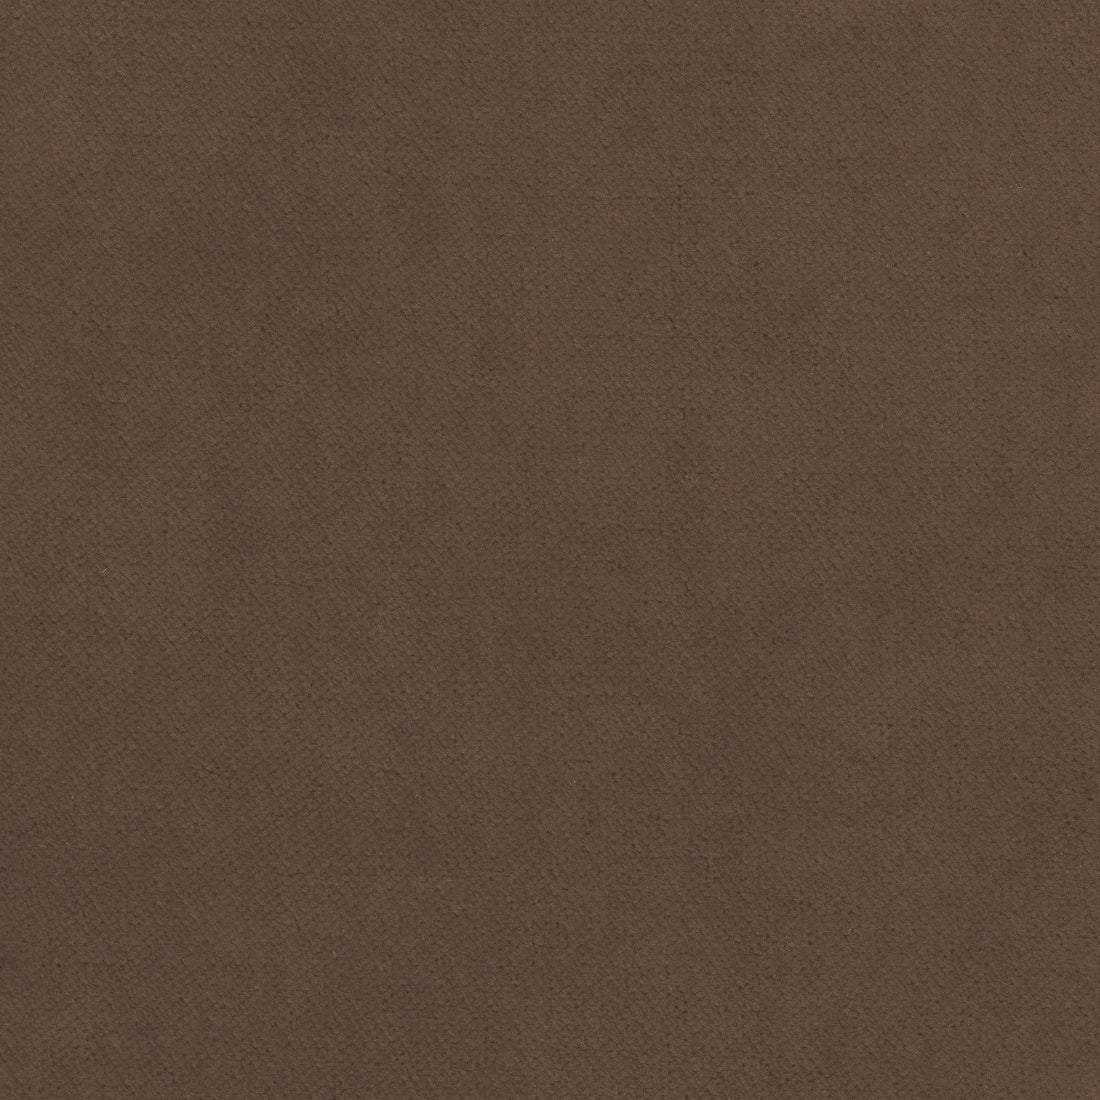 Club Velvet fabric in mink color - pattern number W7226 - by Thibaut in the Club Velvet collection